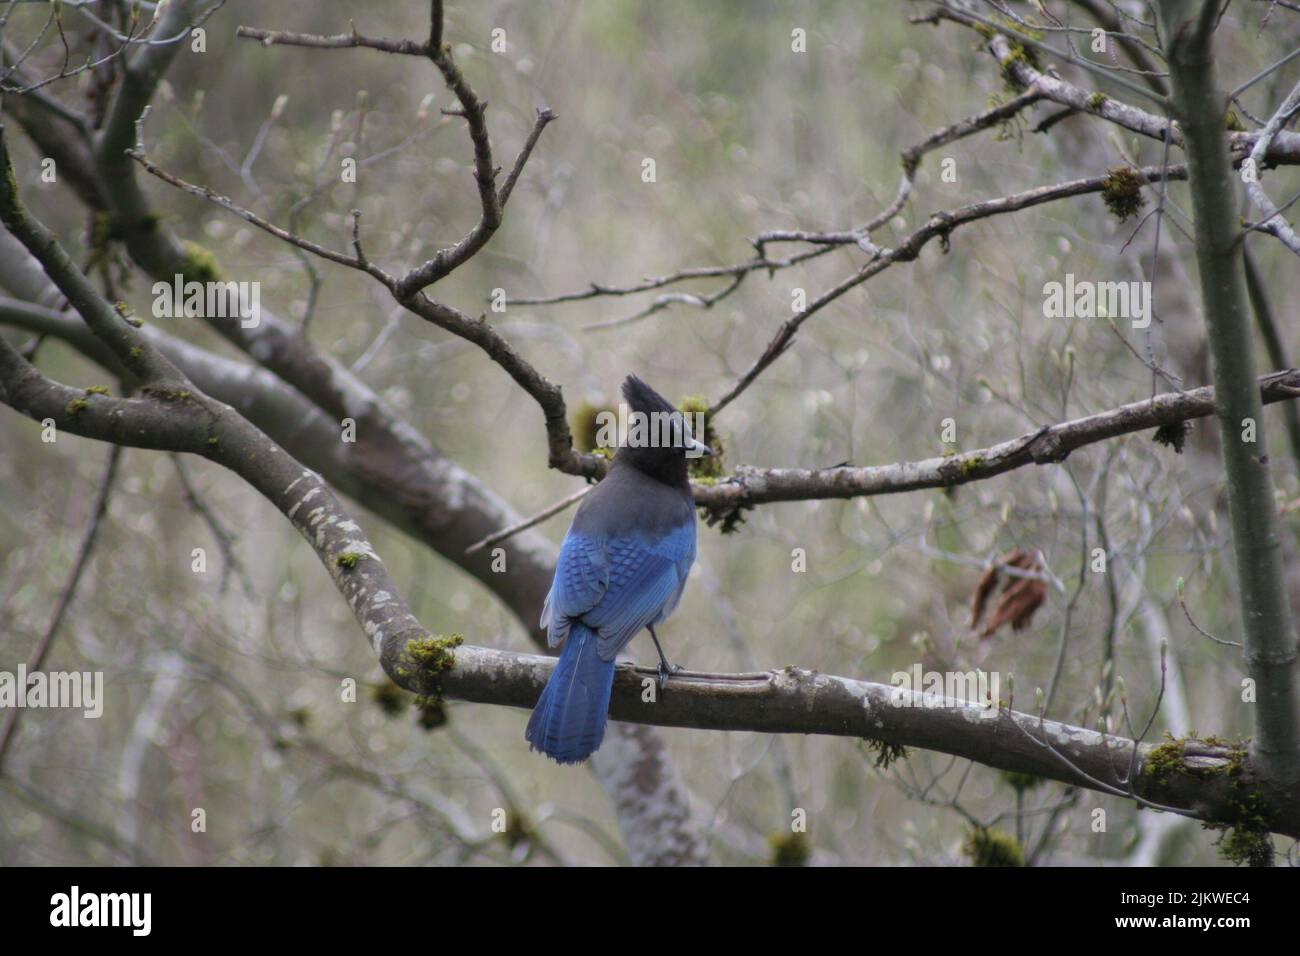 A Stellers jay perched on a tree branch, looking around and waiting Stock Photo